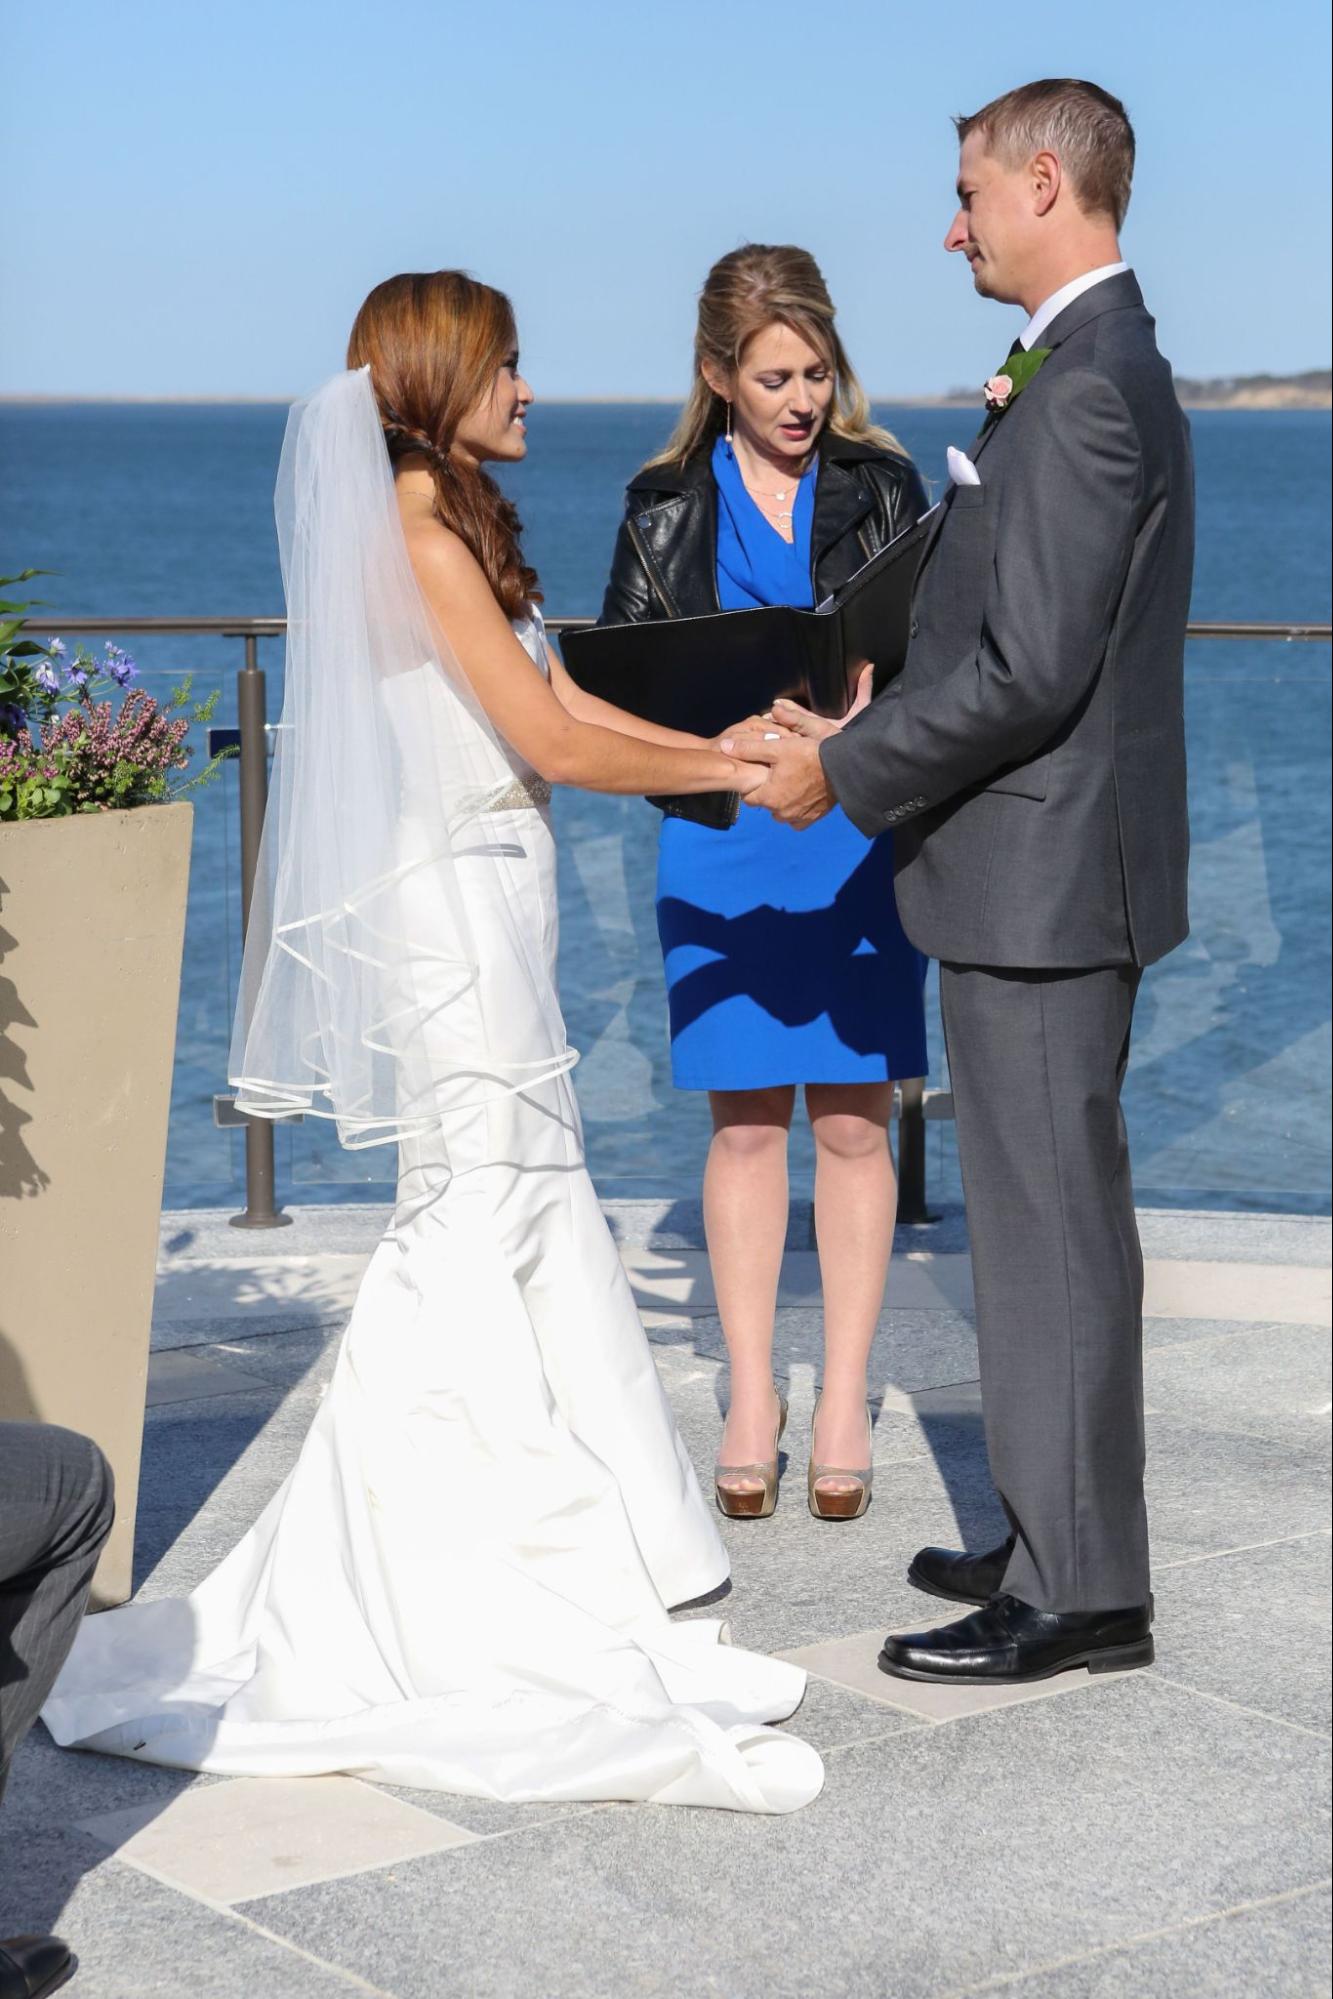 Jill officiating a wedding ceremony in Cape Cod